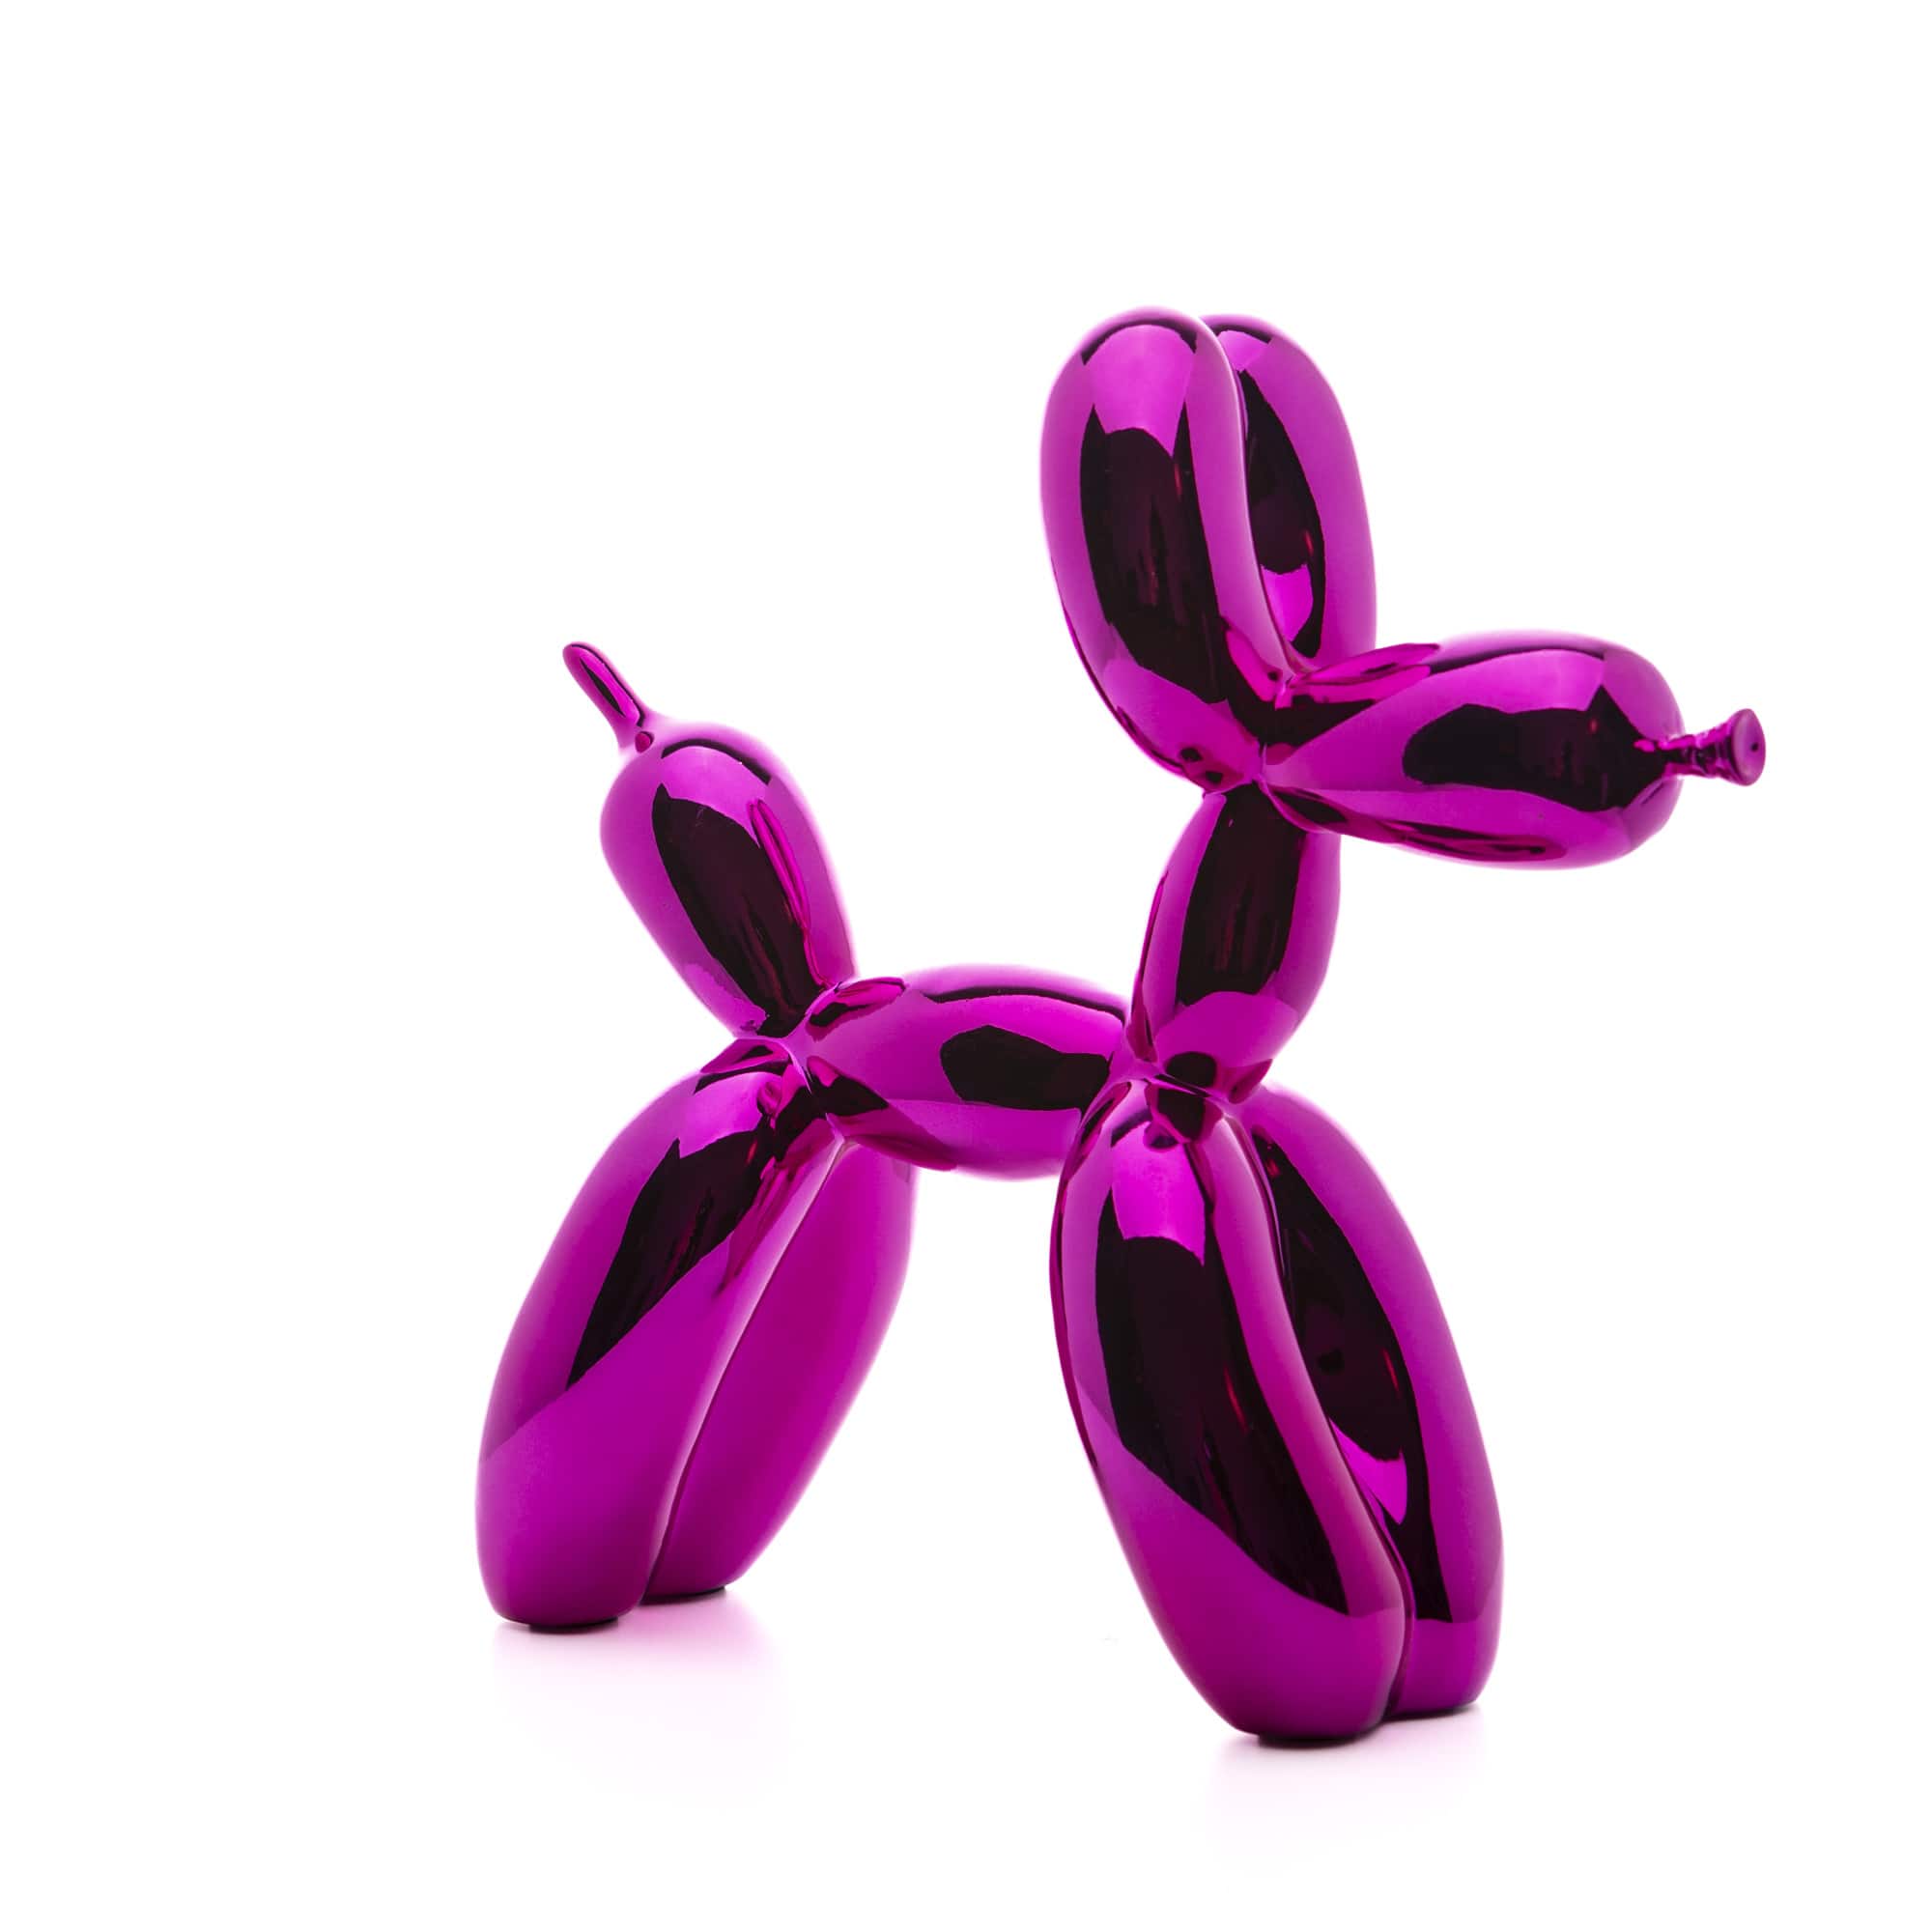 Grande palloncino Cane Scultura di Jeff Koons, Resin Craft Statues Balloon  Dogs Sculptures Office, Colorful Balloon Dog Ornaments Office Home Modern  Decor